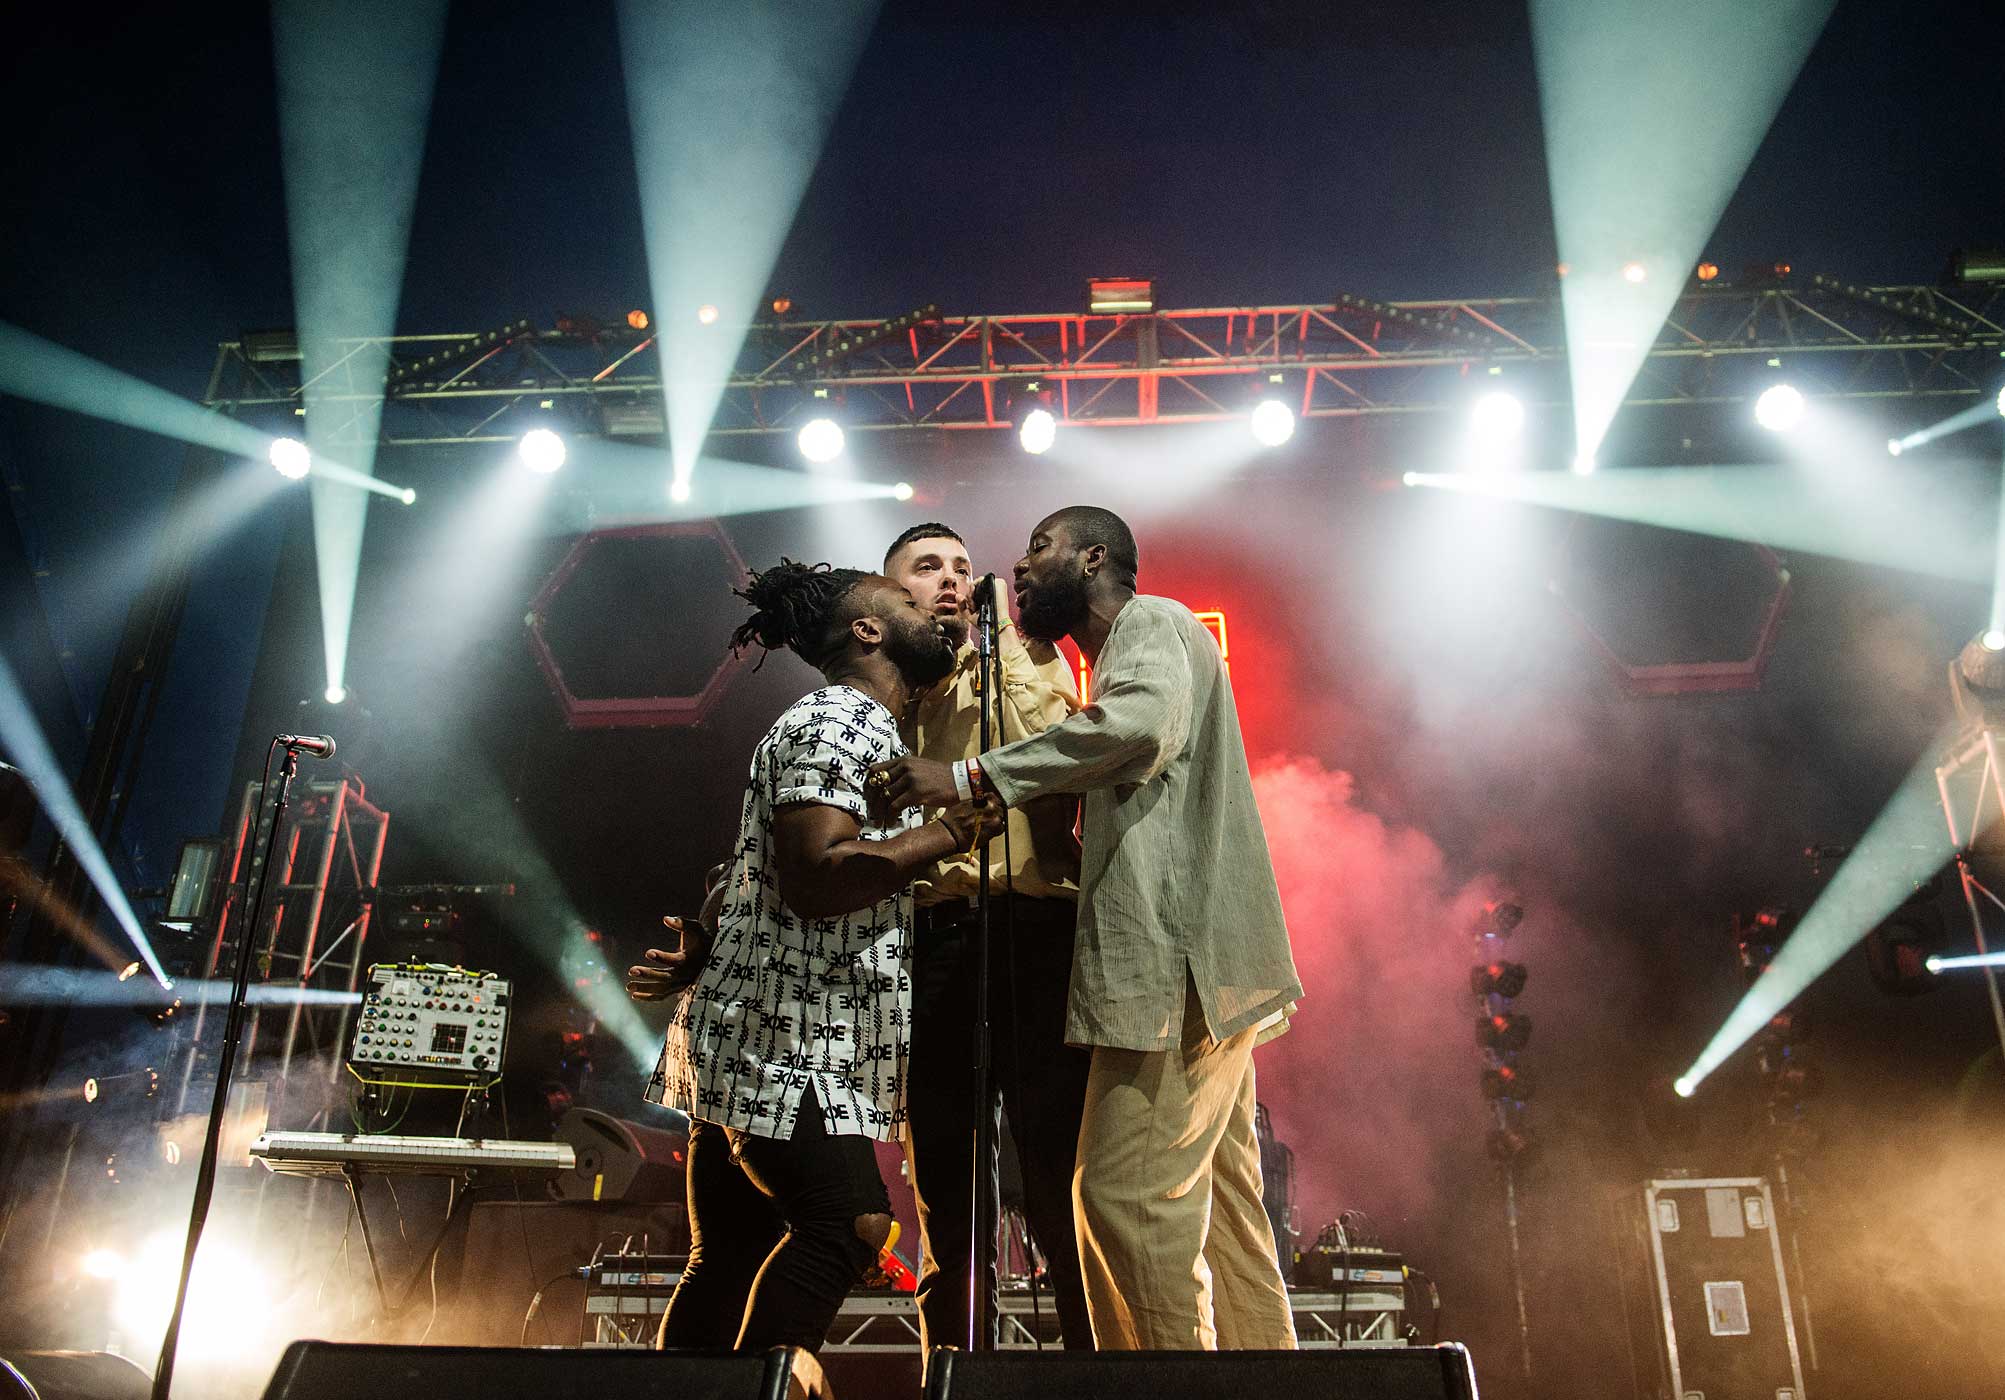 GLASGOW, UNITED KINGDOM - AUGUST 30: Kayus Bankole, Graham Hastings and Alloysious Massaquoi of Young Fathers performs on stage at The Last Big Weekend at Richmond Park on August 30, 2014 in Glasgow, United Kingdom. (Photo by Ross Gilmore/Redferns via Getty Images) (Ross Gilmore&amp;mdash;Redferns via Getty Images)